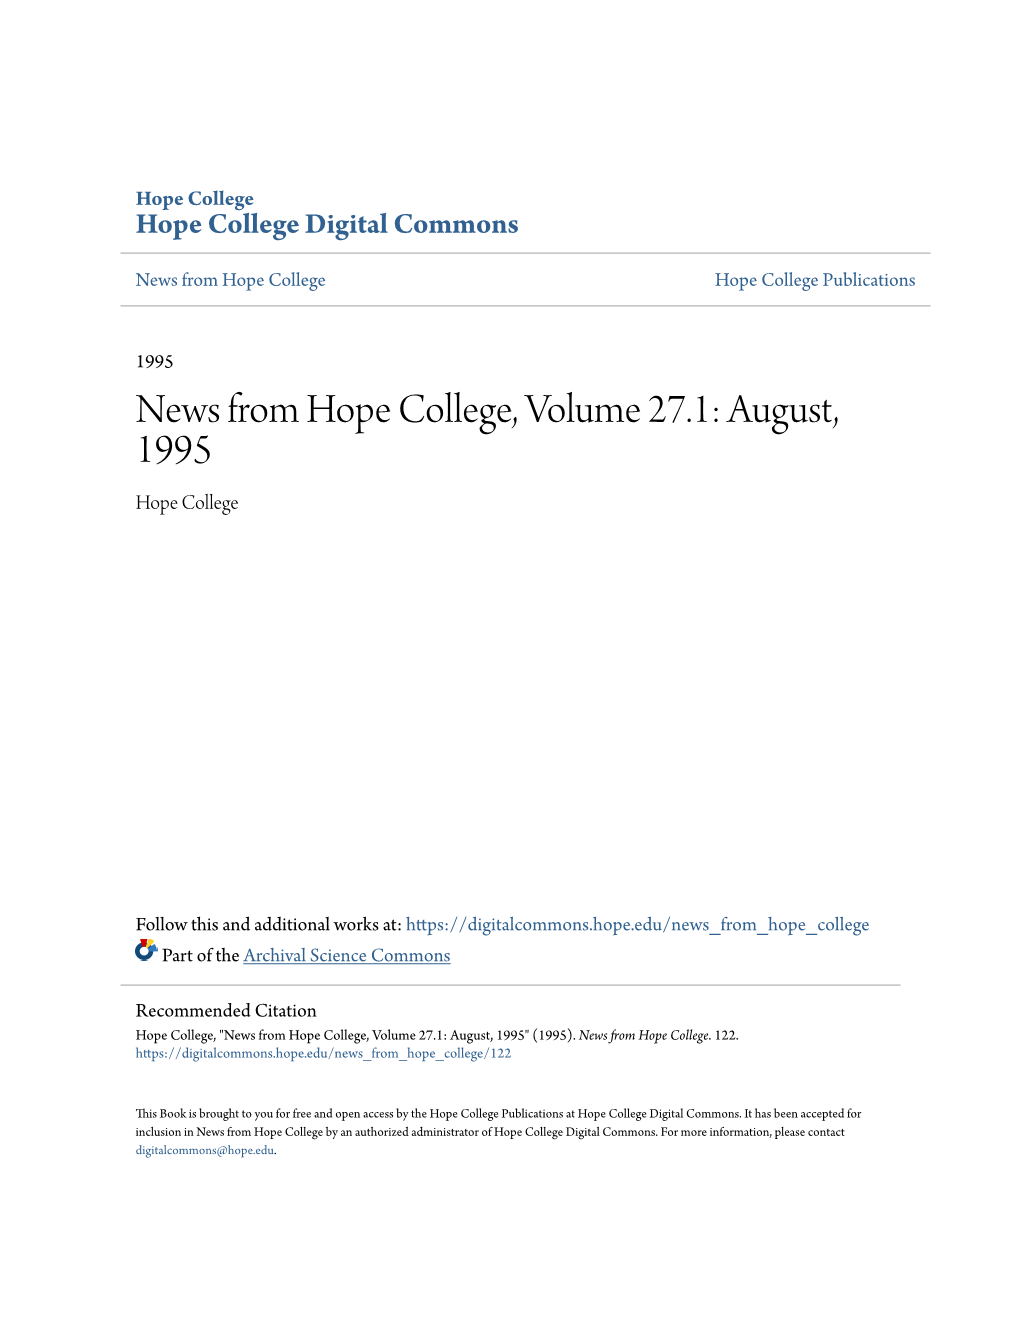 News from Hope College, Volume 27.1: August, 1995 Hope College